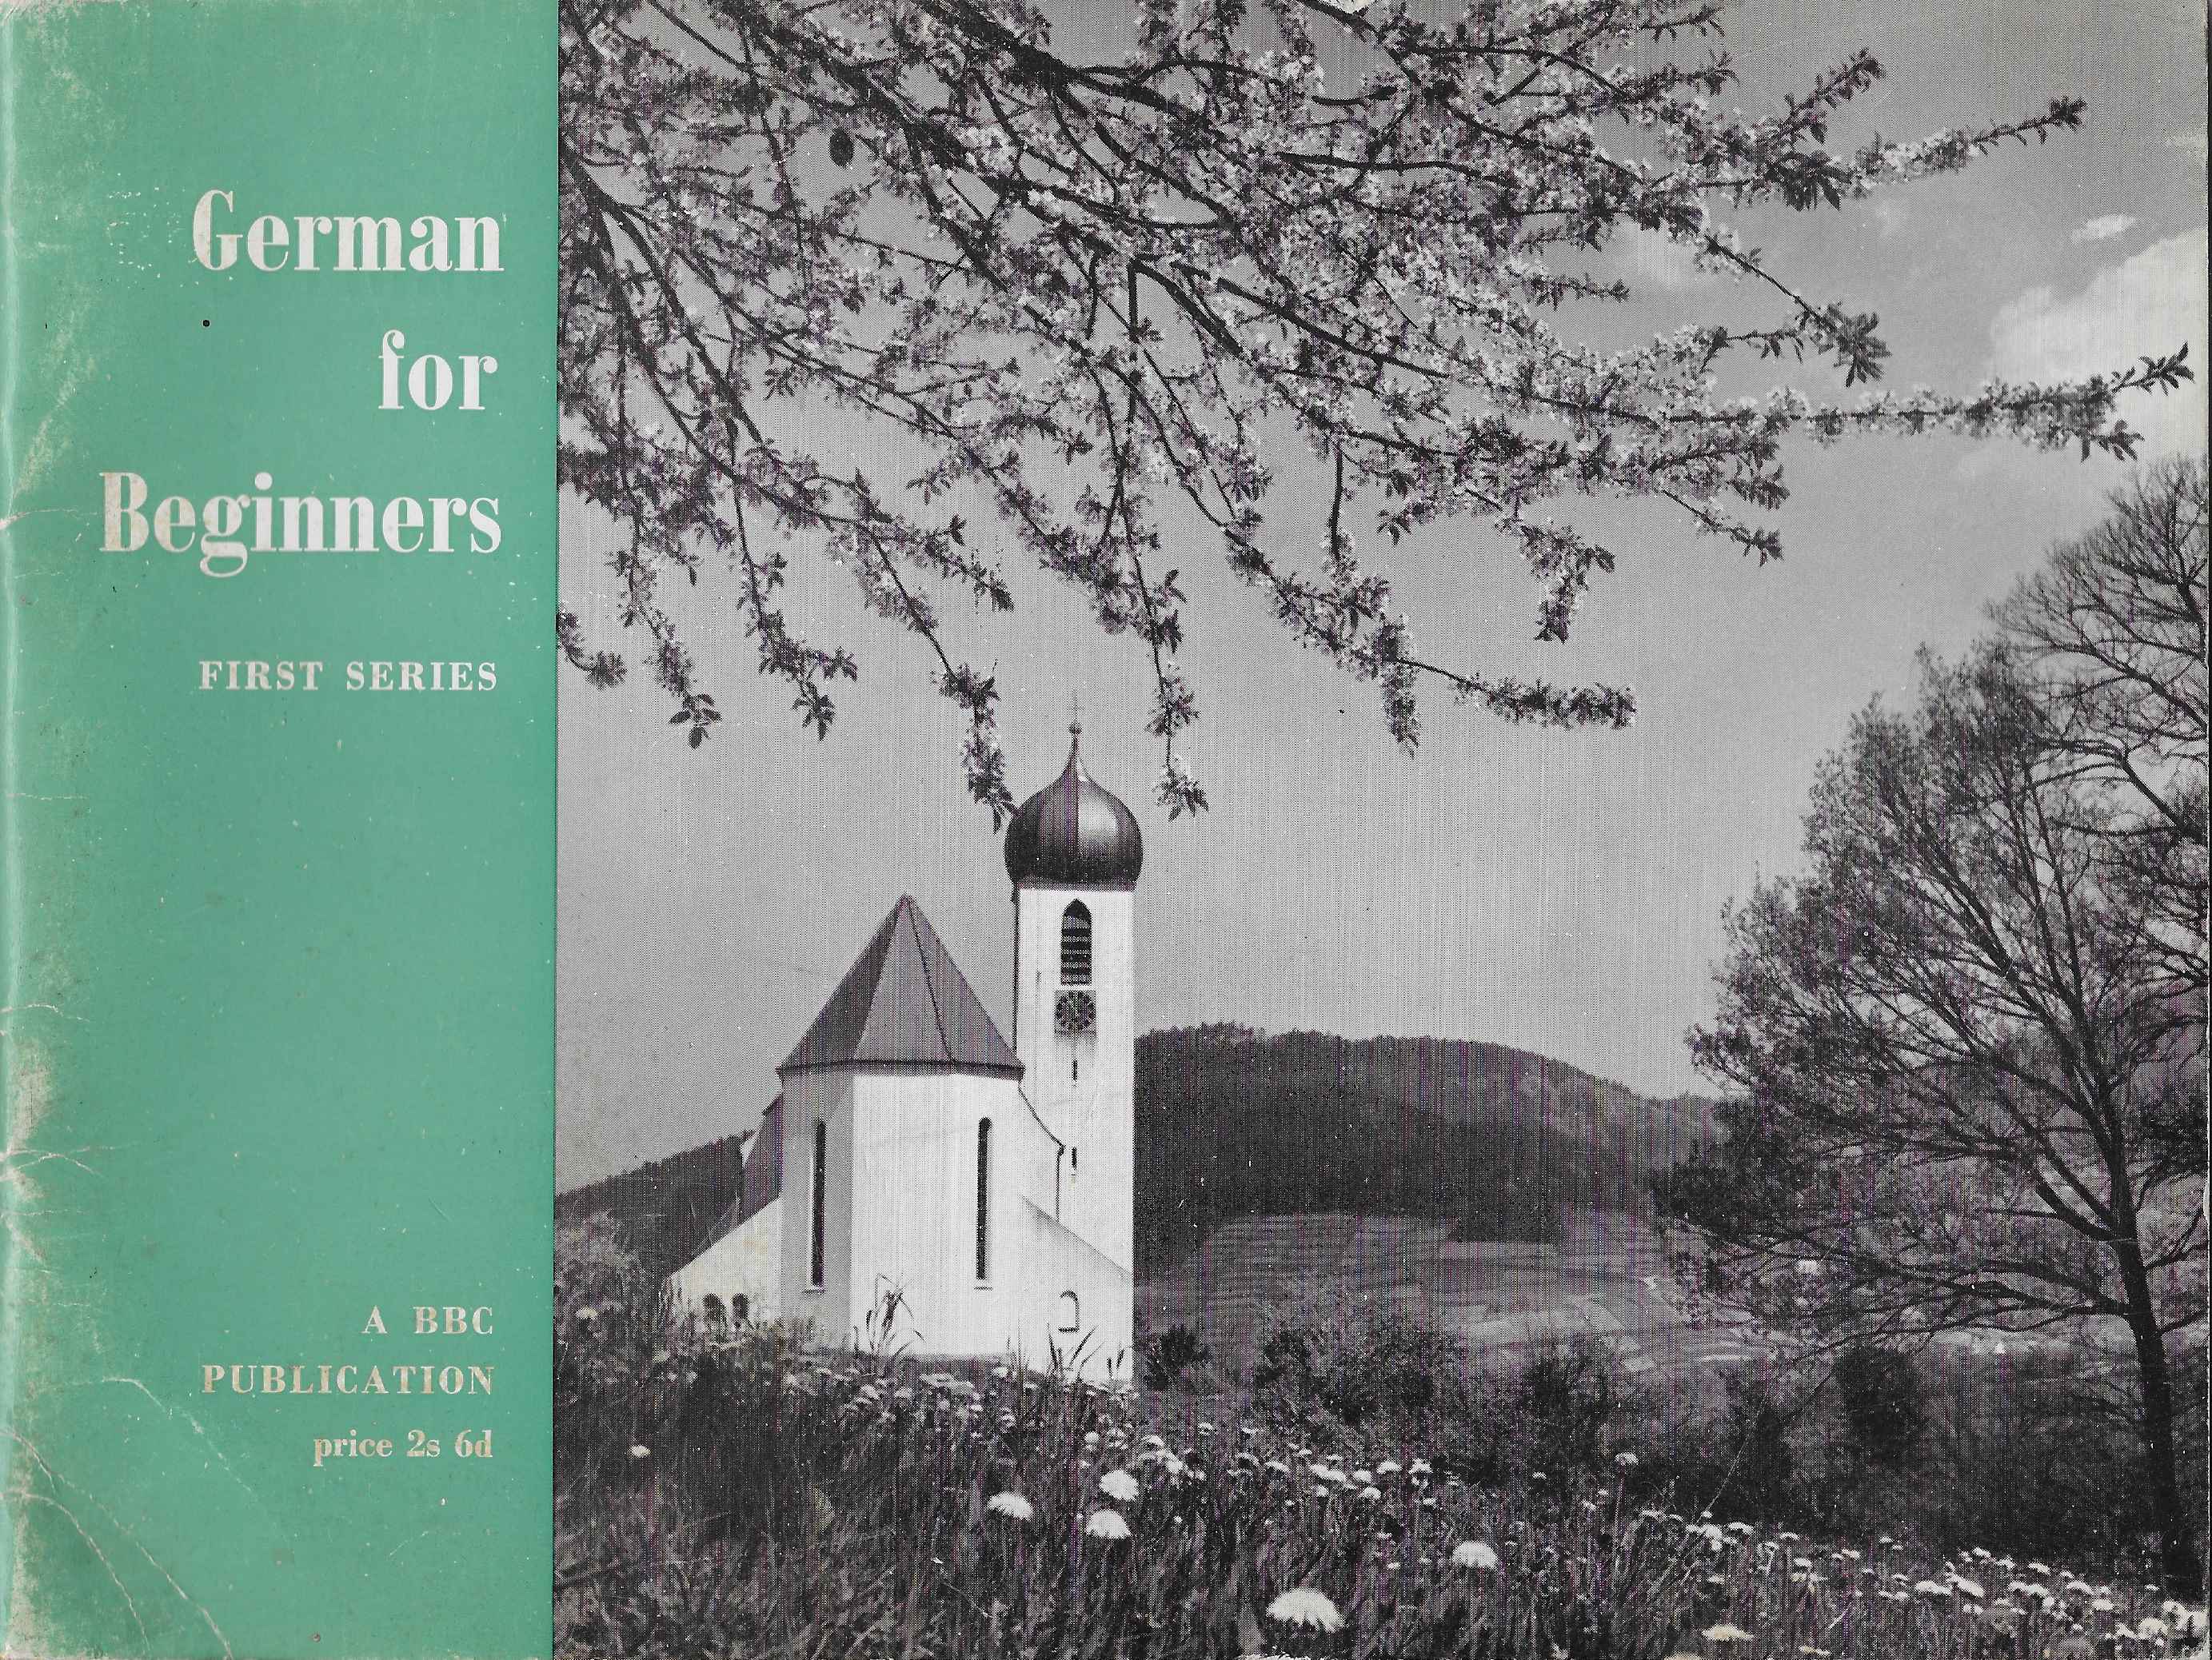 Picture of German for beginners - First series by artist Sydney Salame from the BBC books - Records and Tapes library